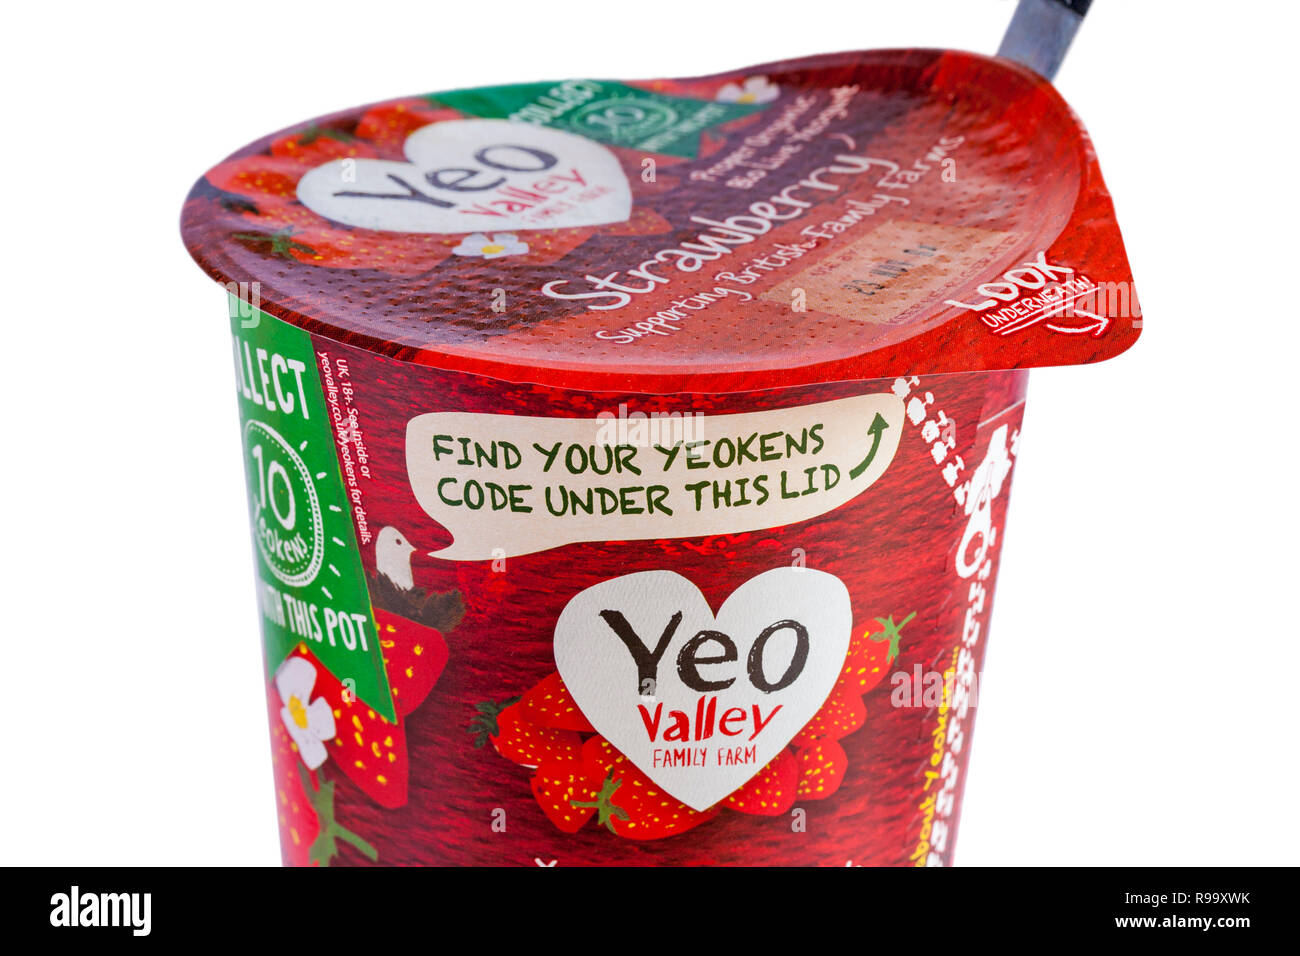 Find your Yeokens code under this lid - detail on Yeo Valley yogurt pot Stock Photo